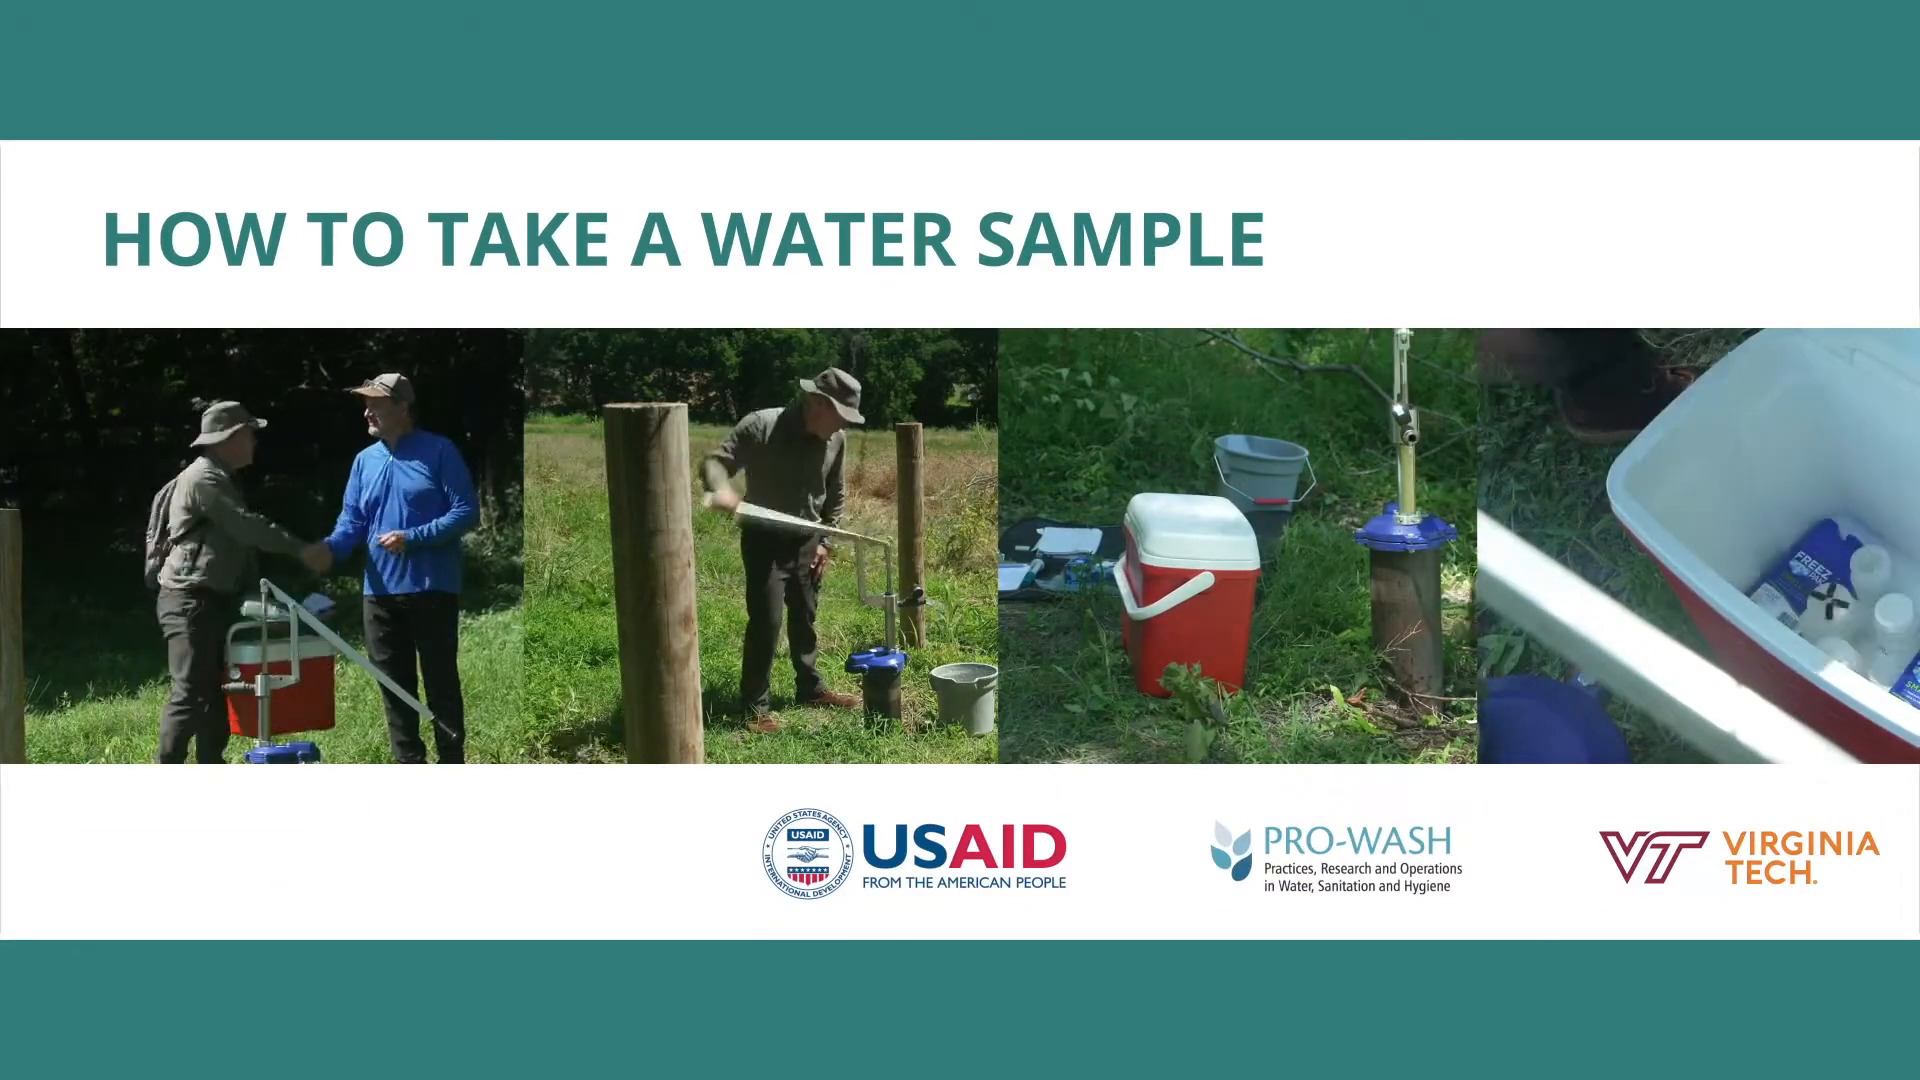 thumbnail of a global development training video showing how to collect water sample